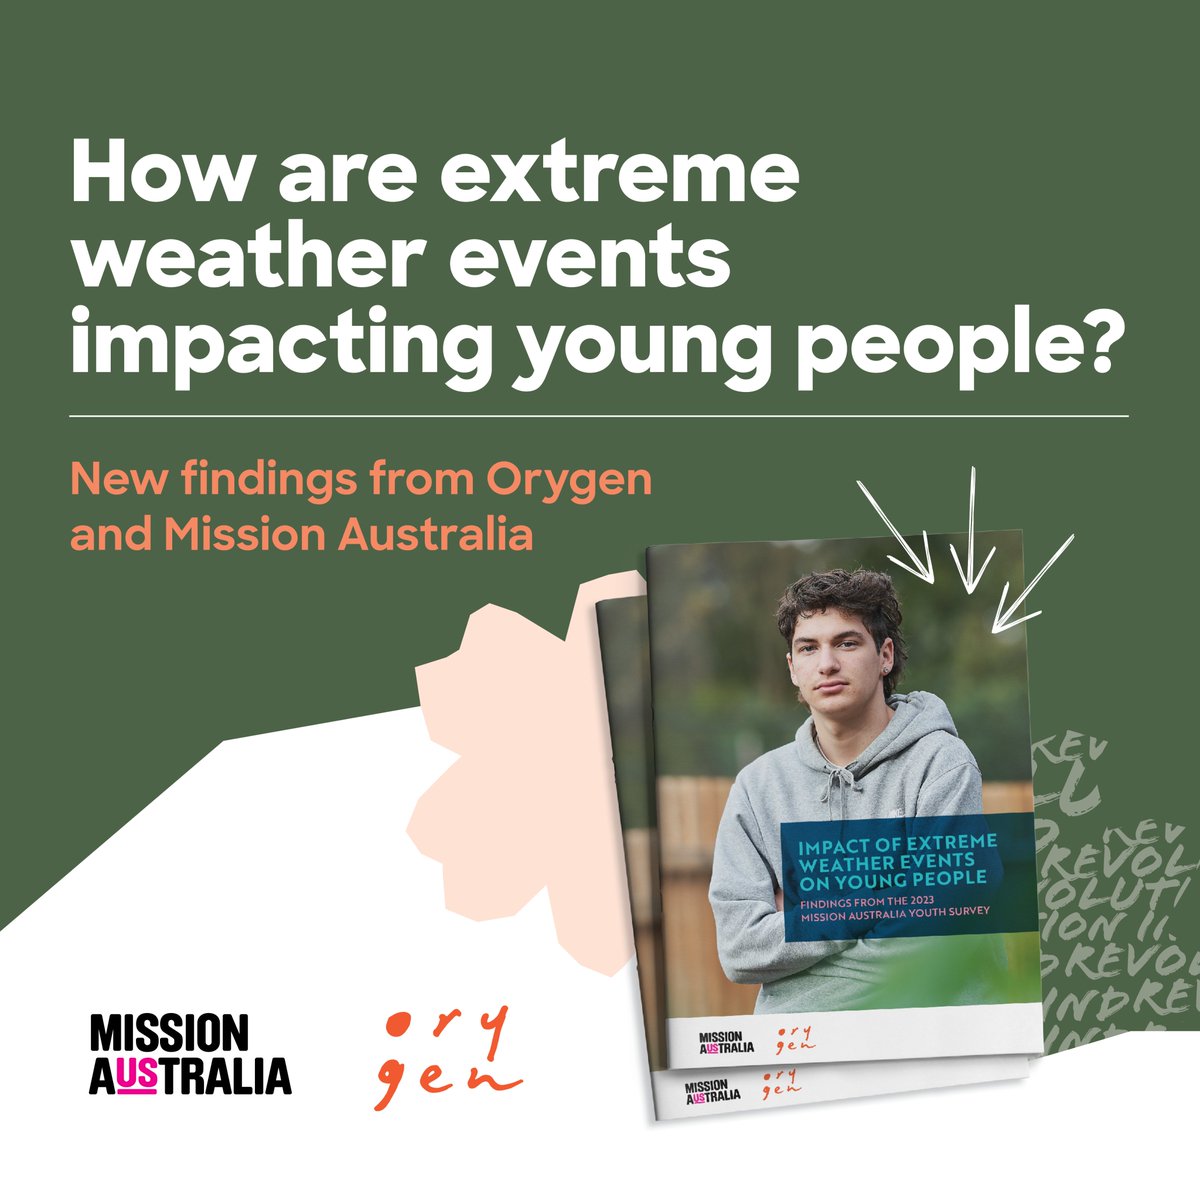 Our report with @orygen_aus found young ppl are experiencing 'profound & distressing' extreme weather impacts & 6 in 10 worry about climate change #YouthSurvey2023. On #EarthDay we call for urgent climate change action & for Aus to mitigate these impacts. missionaustralia.com.au/media-centre/m…